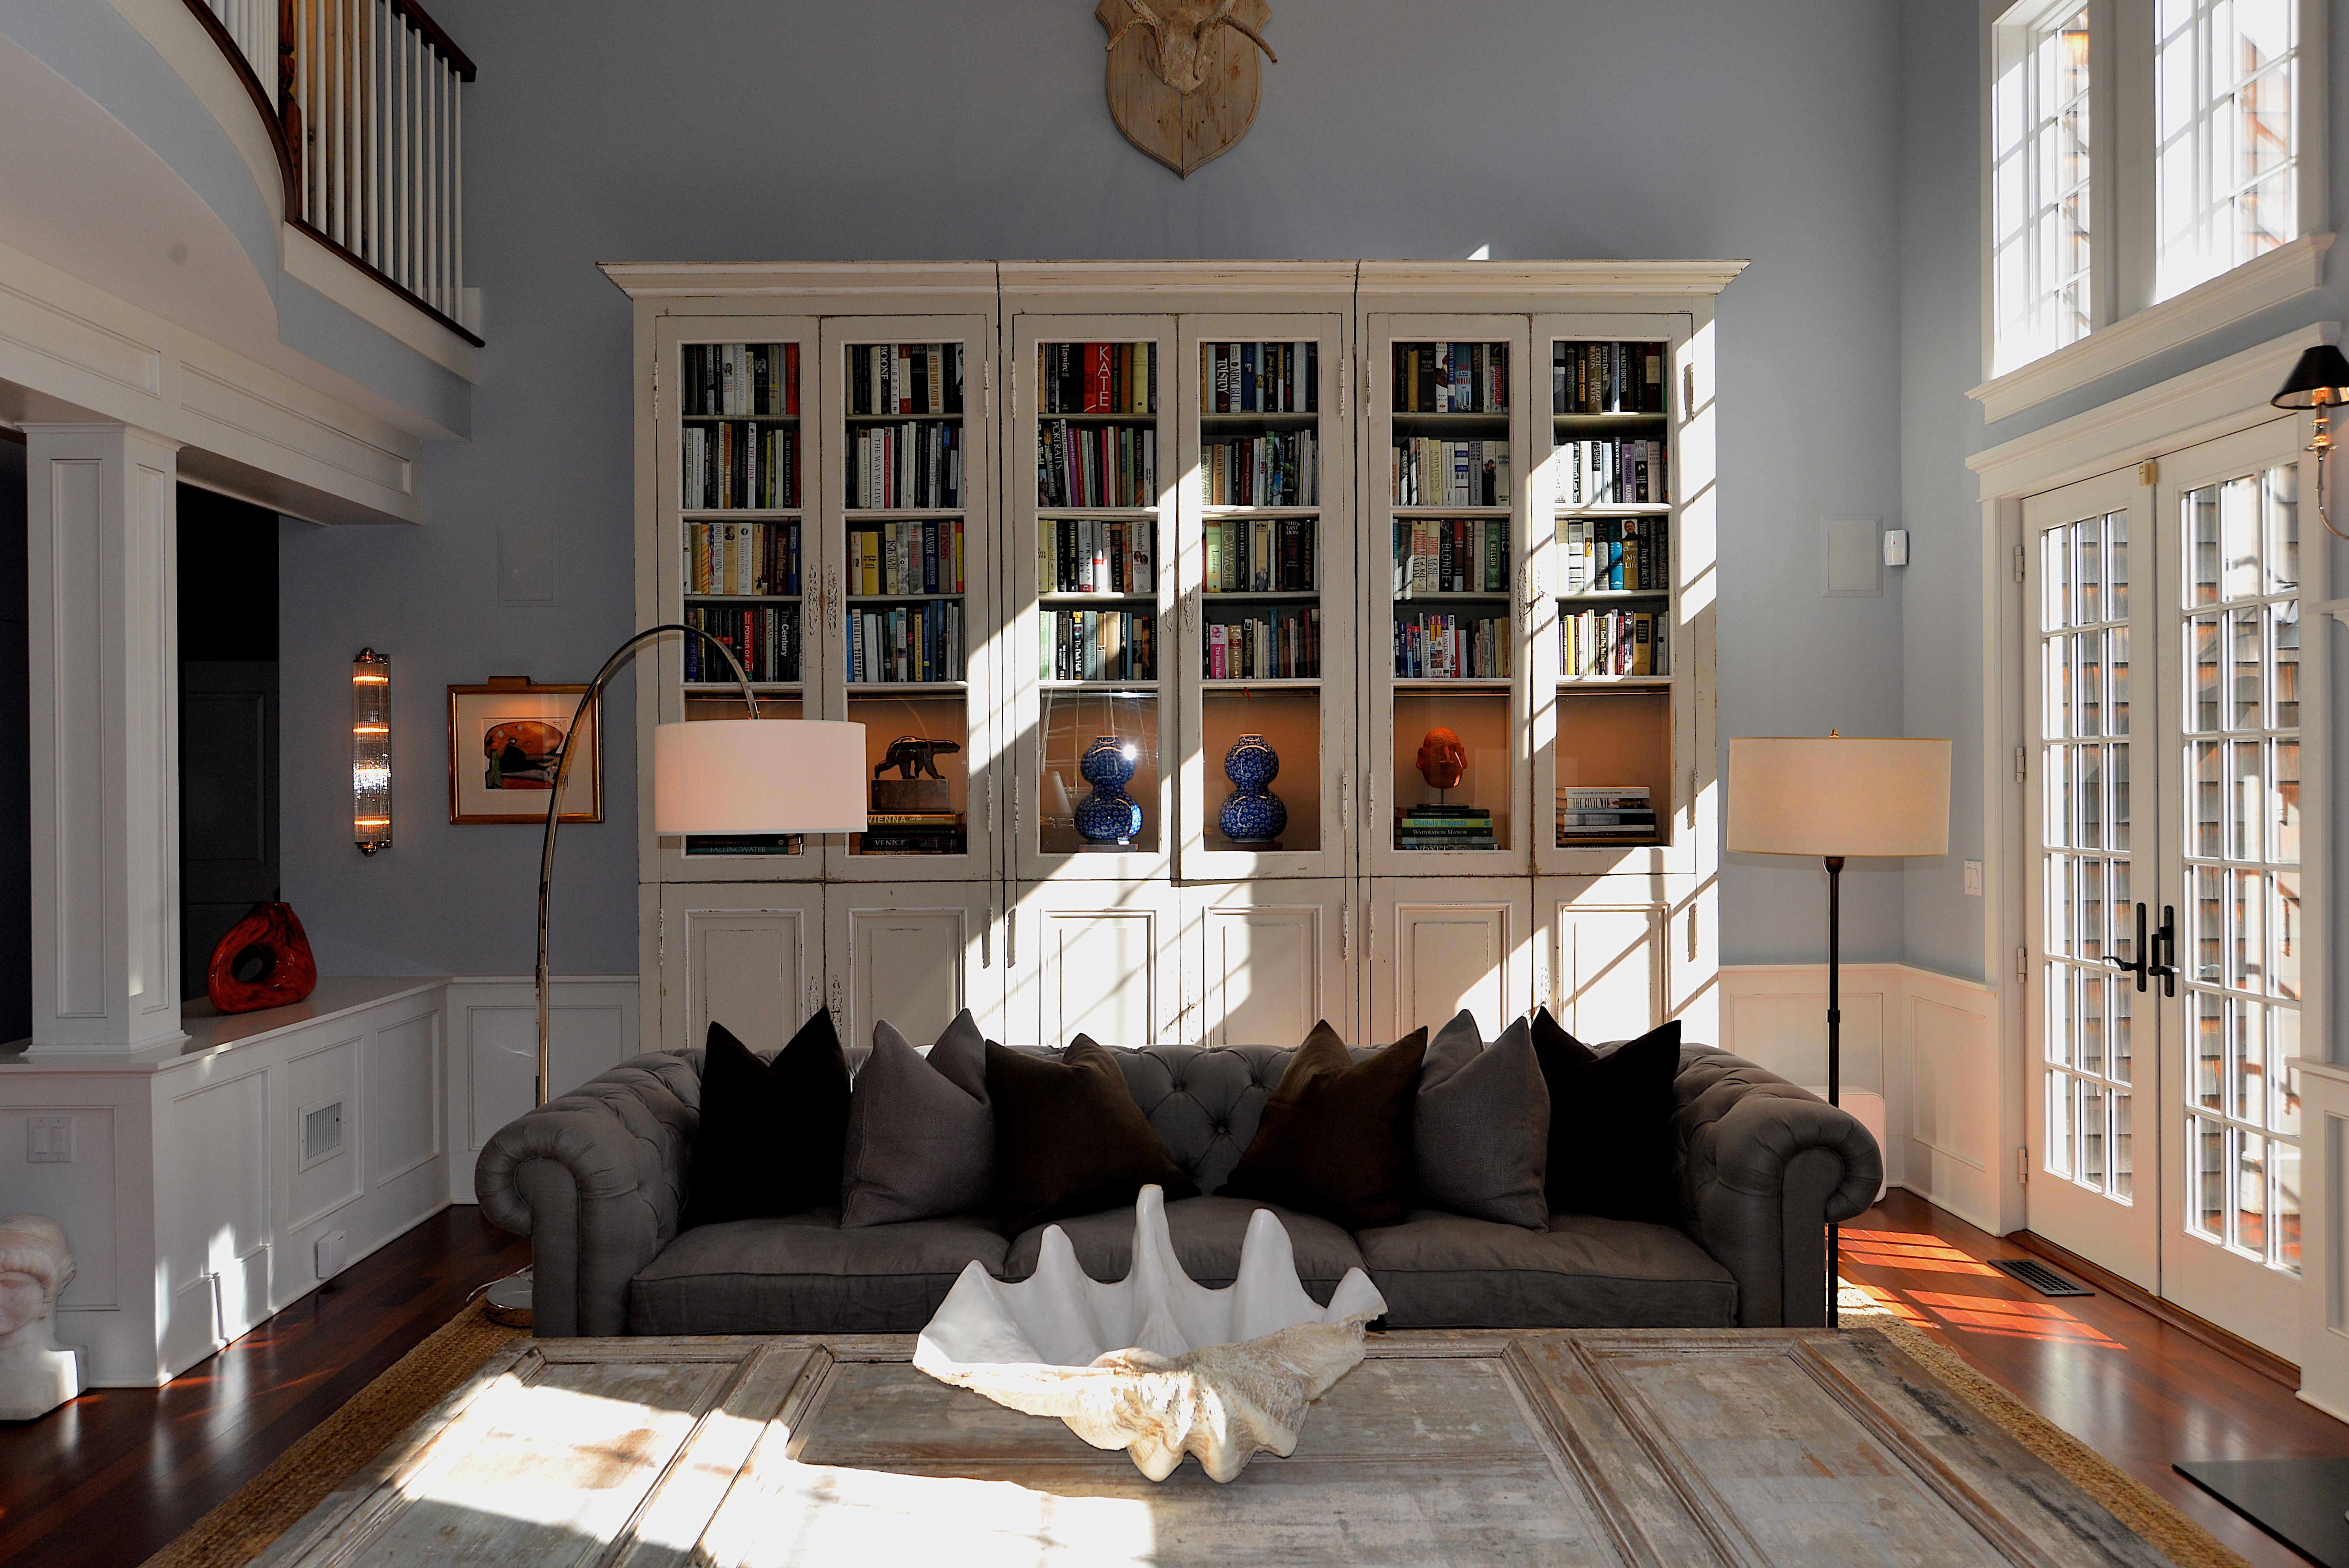 A nearly 12-foot-tall French country bookcase built in three sections and modified with lighting elements.